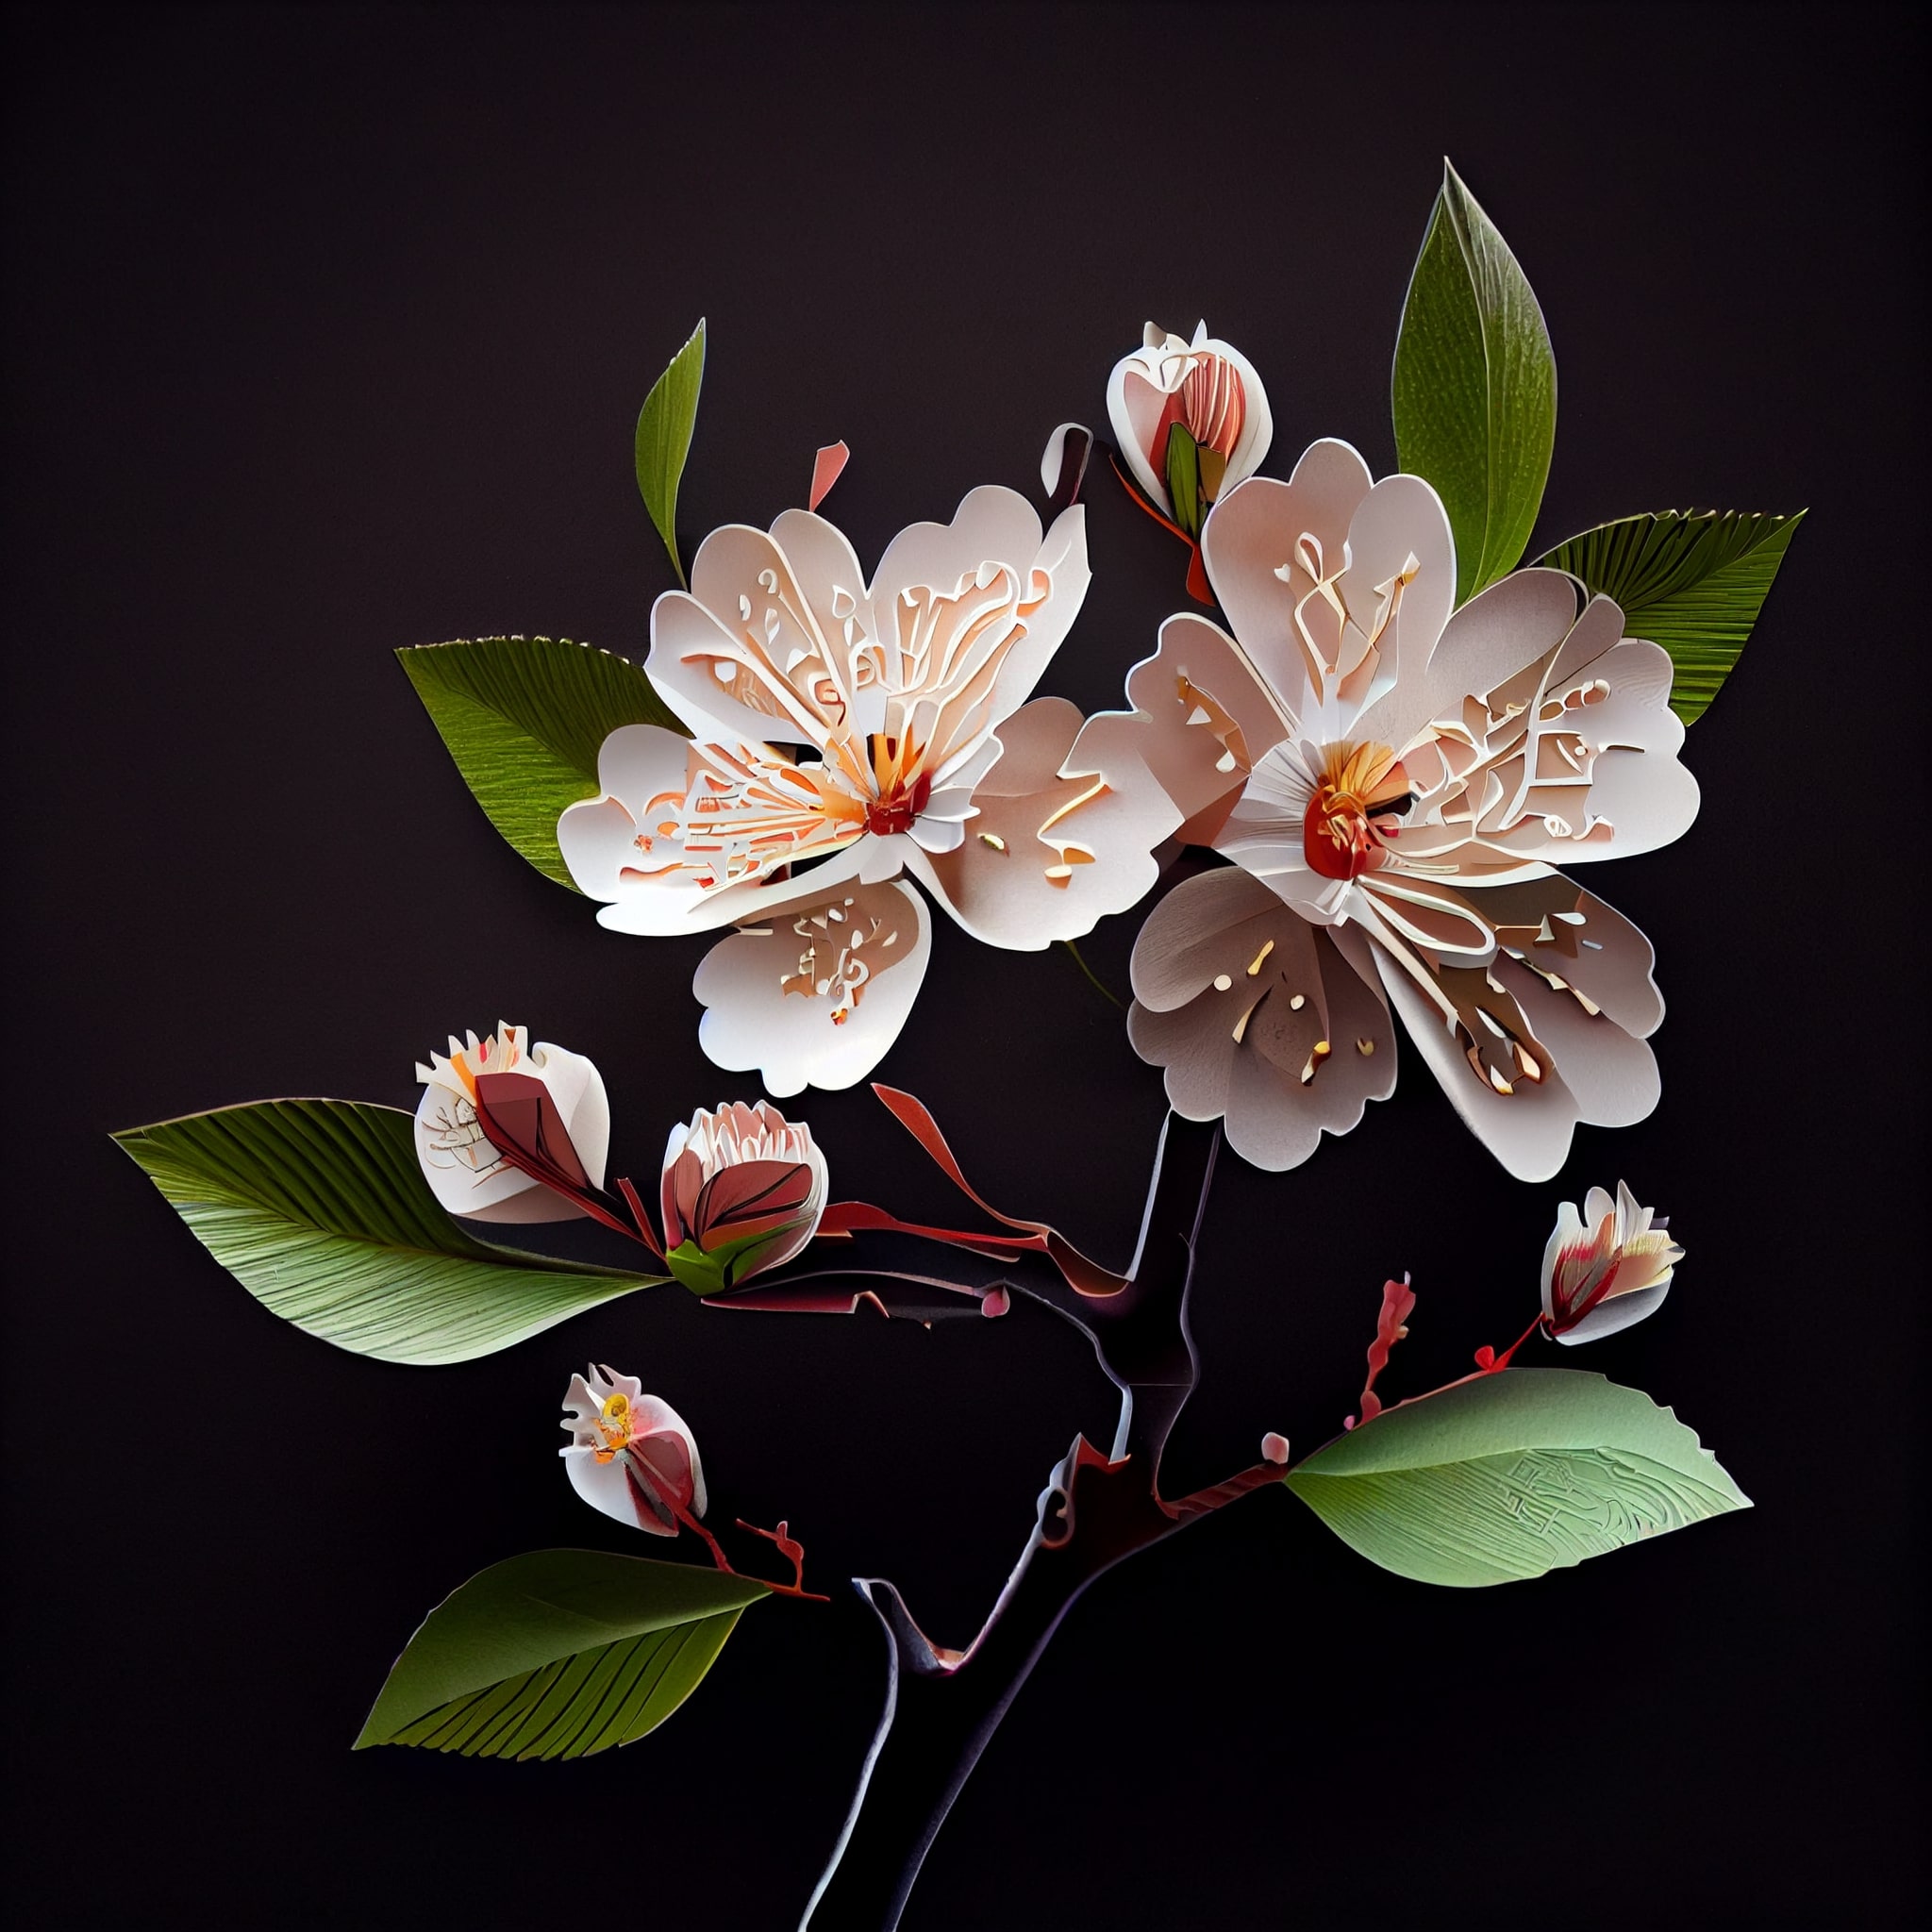 Group of flowers with green leaves on a black background.